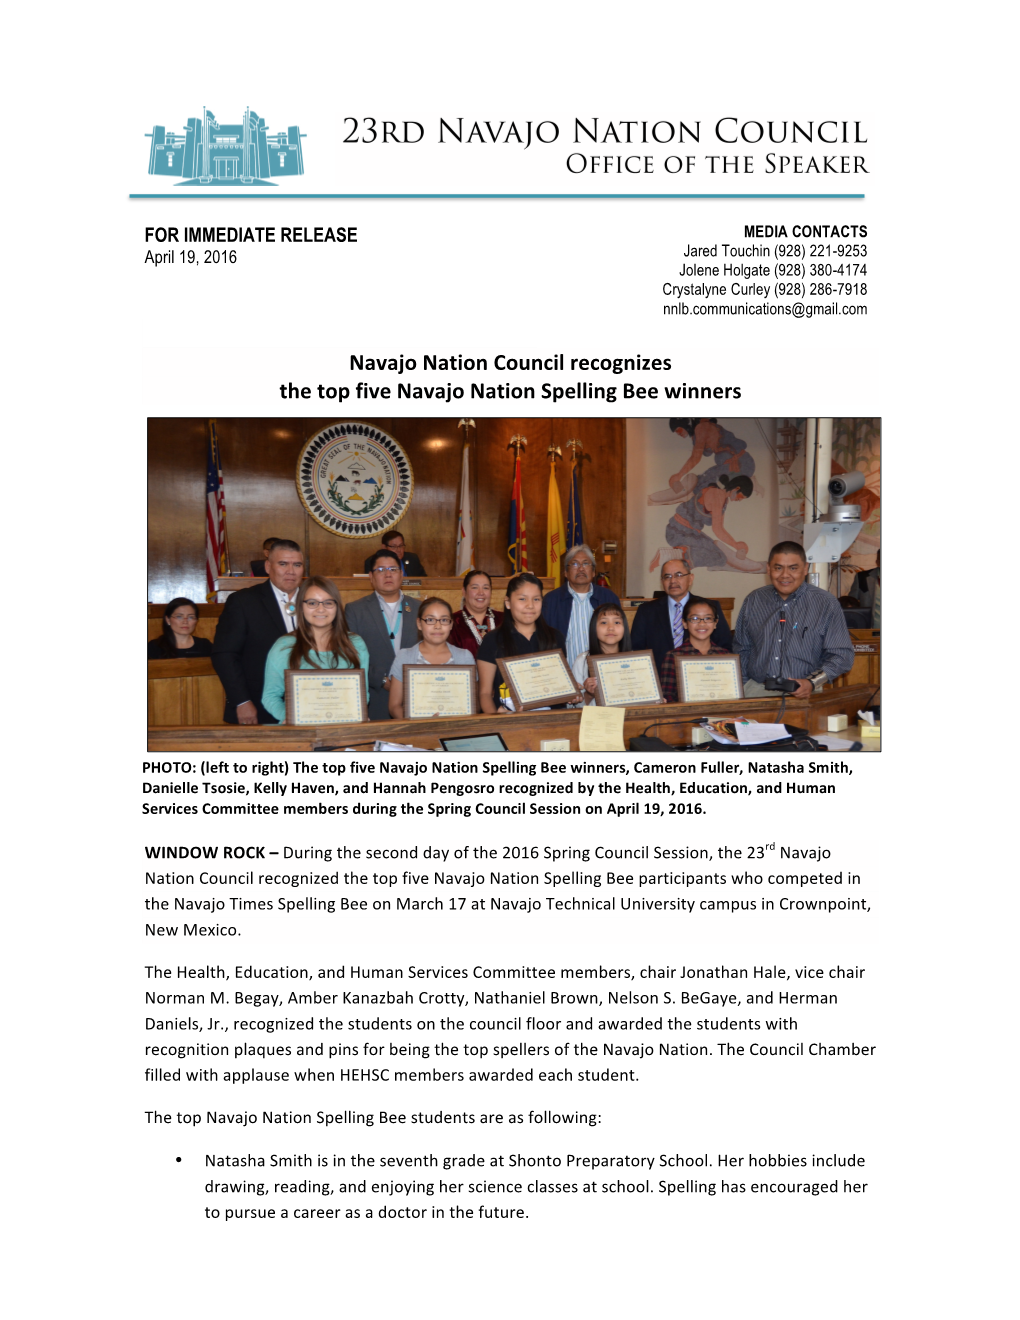 Navajo Nation Council Recognizes the Top Five Navajo Nation Spelling Bee Winners